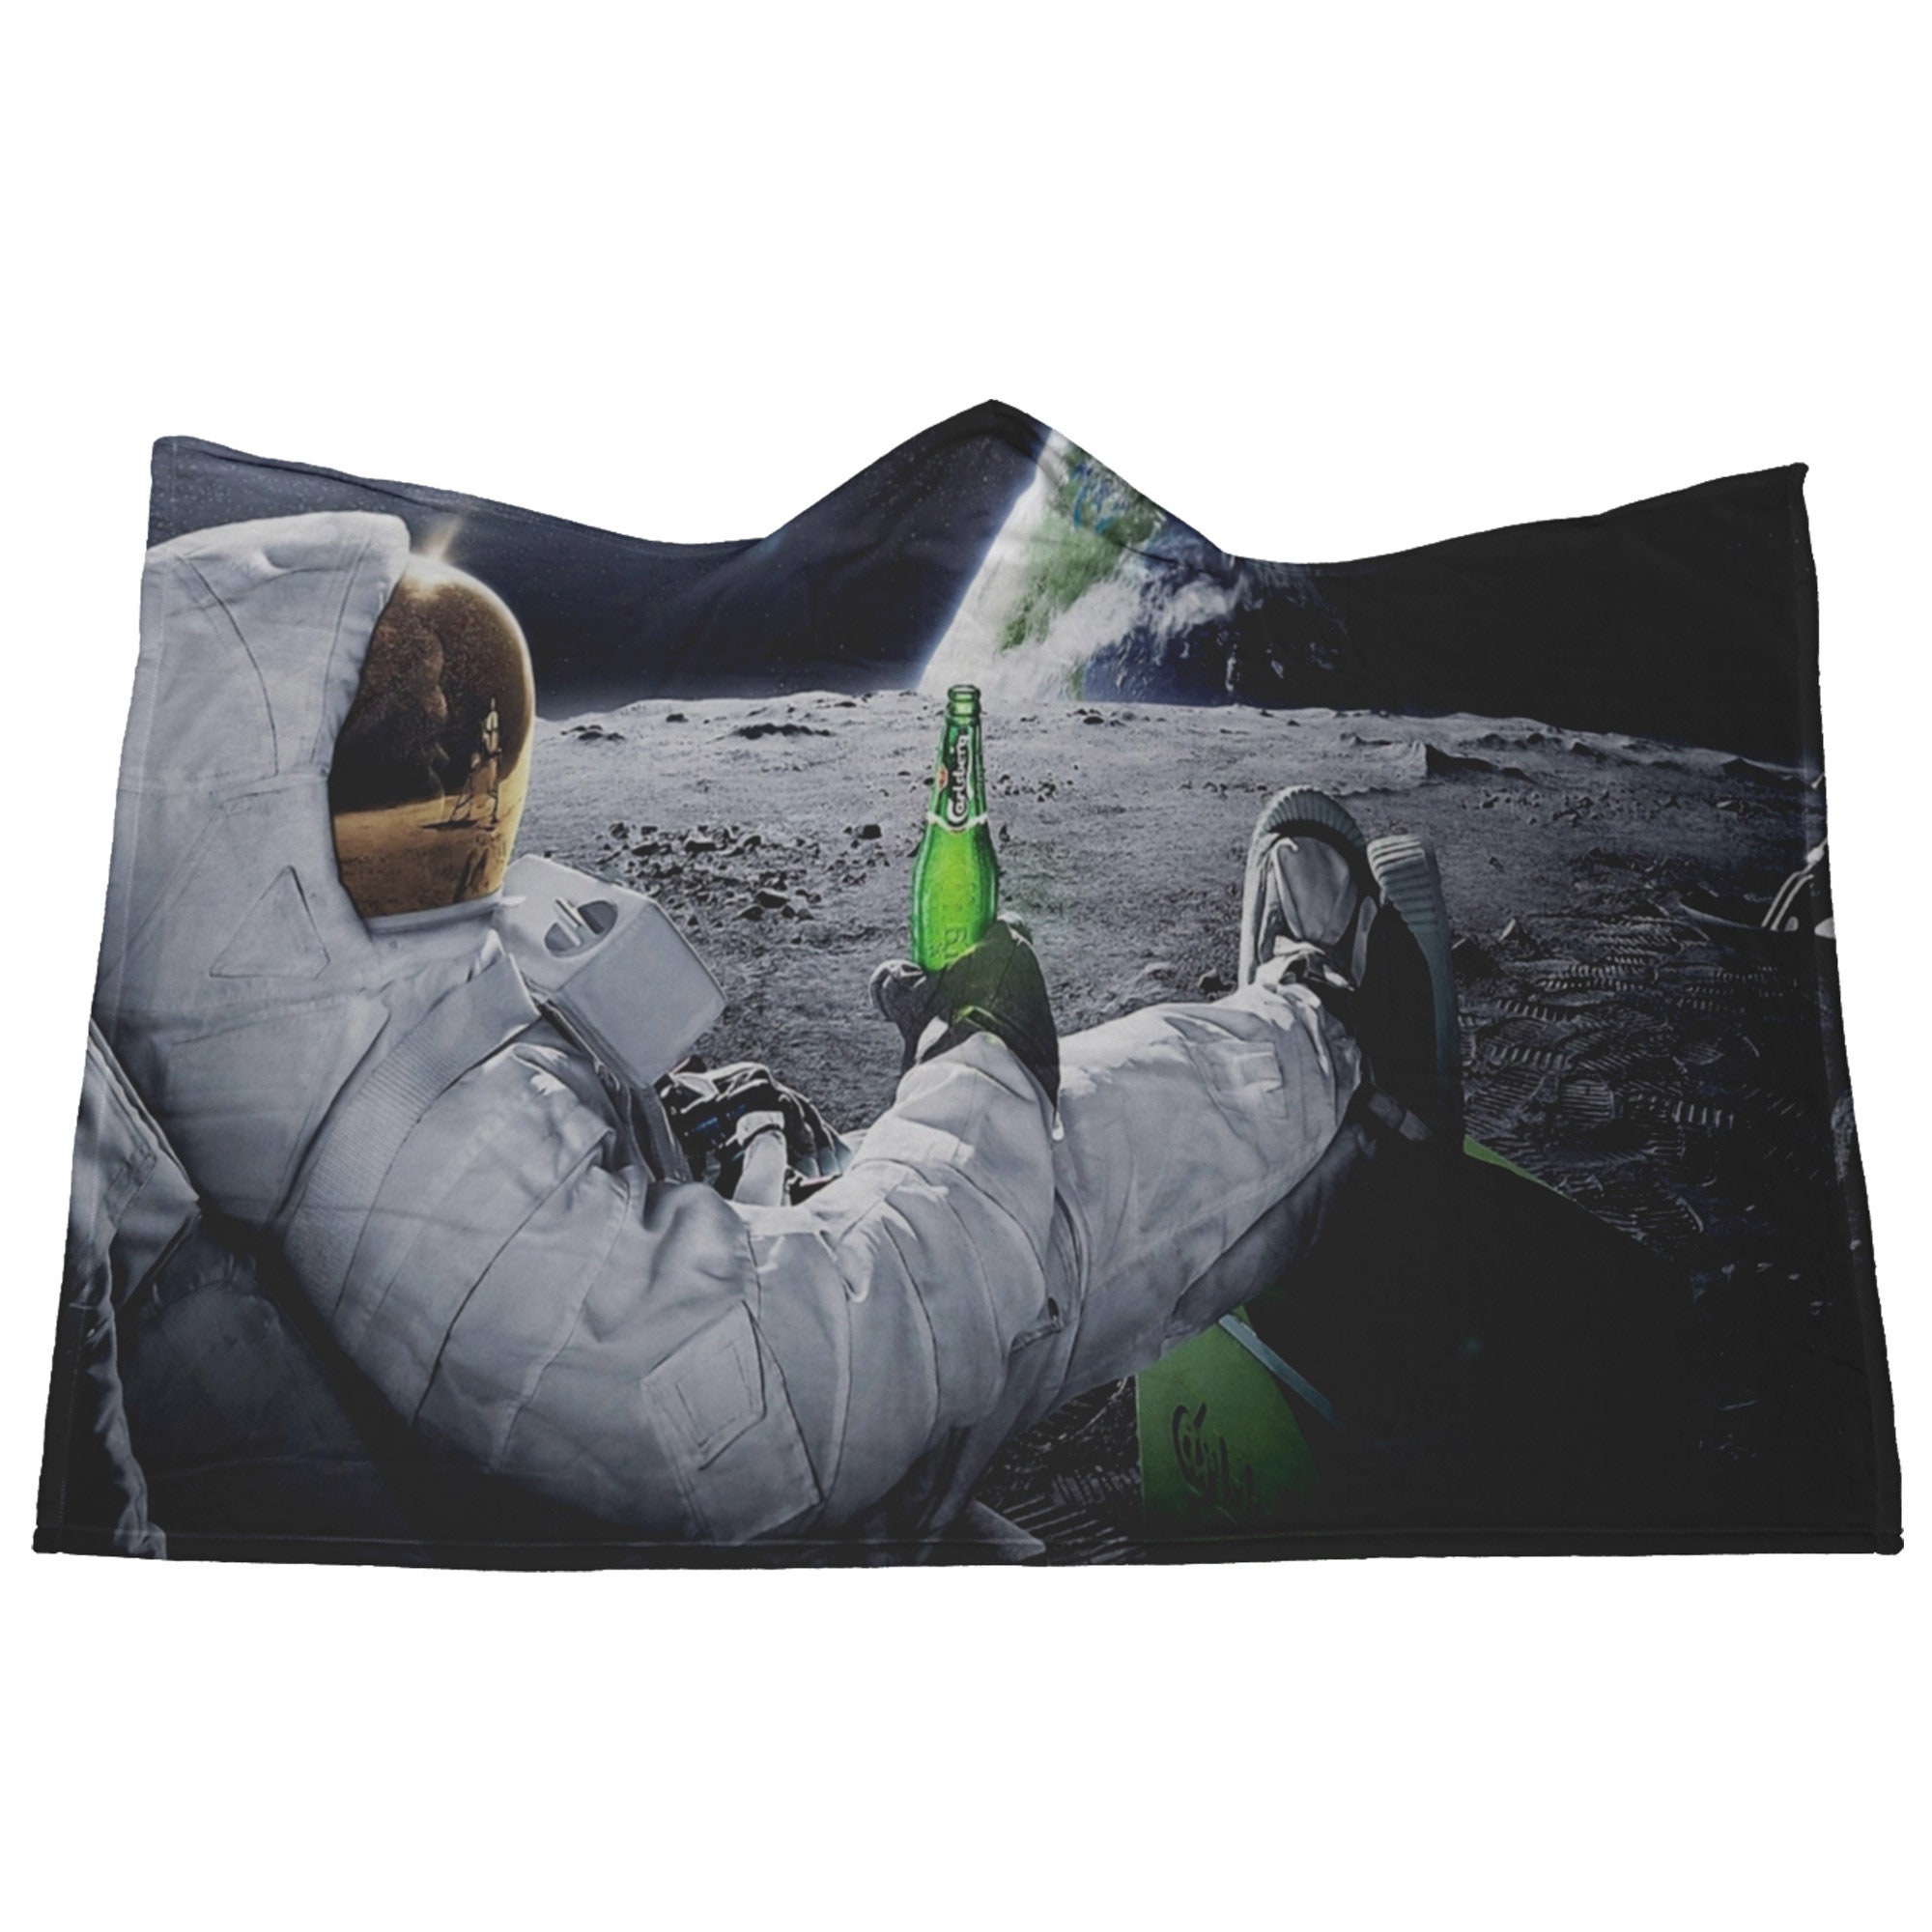 Beer Drinking Astronaut Hooded Blanket, Adult and Small Sizes, Soft Fleece Blanket with a Hood, Man Cave Throw